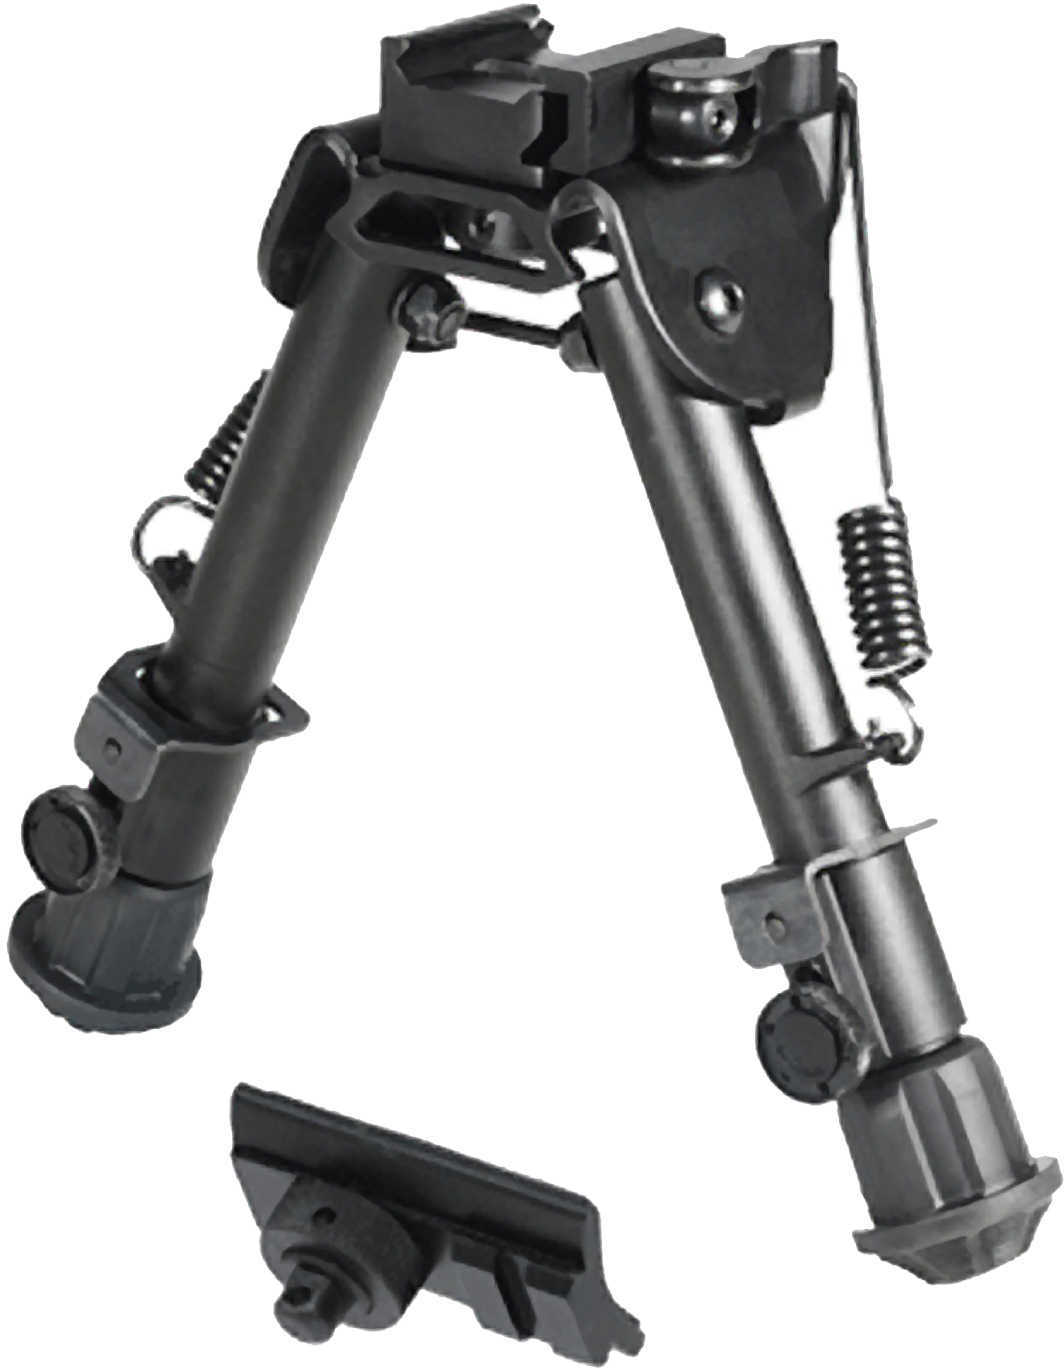 Leapers UTG Bipod Tactical Op 5.9-7.3" Picatinny Mount W/Stud Adapter